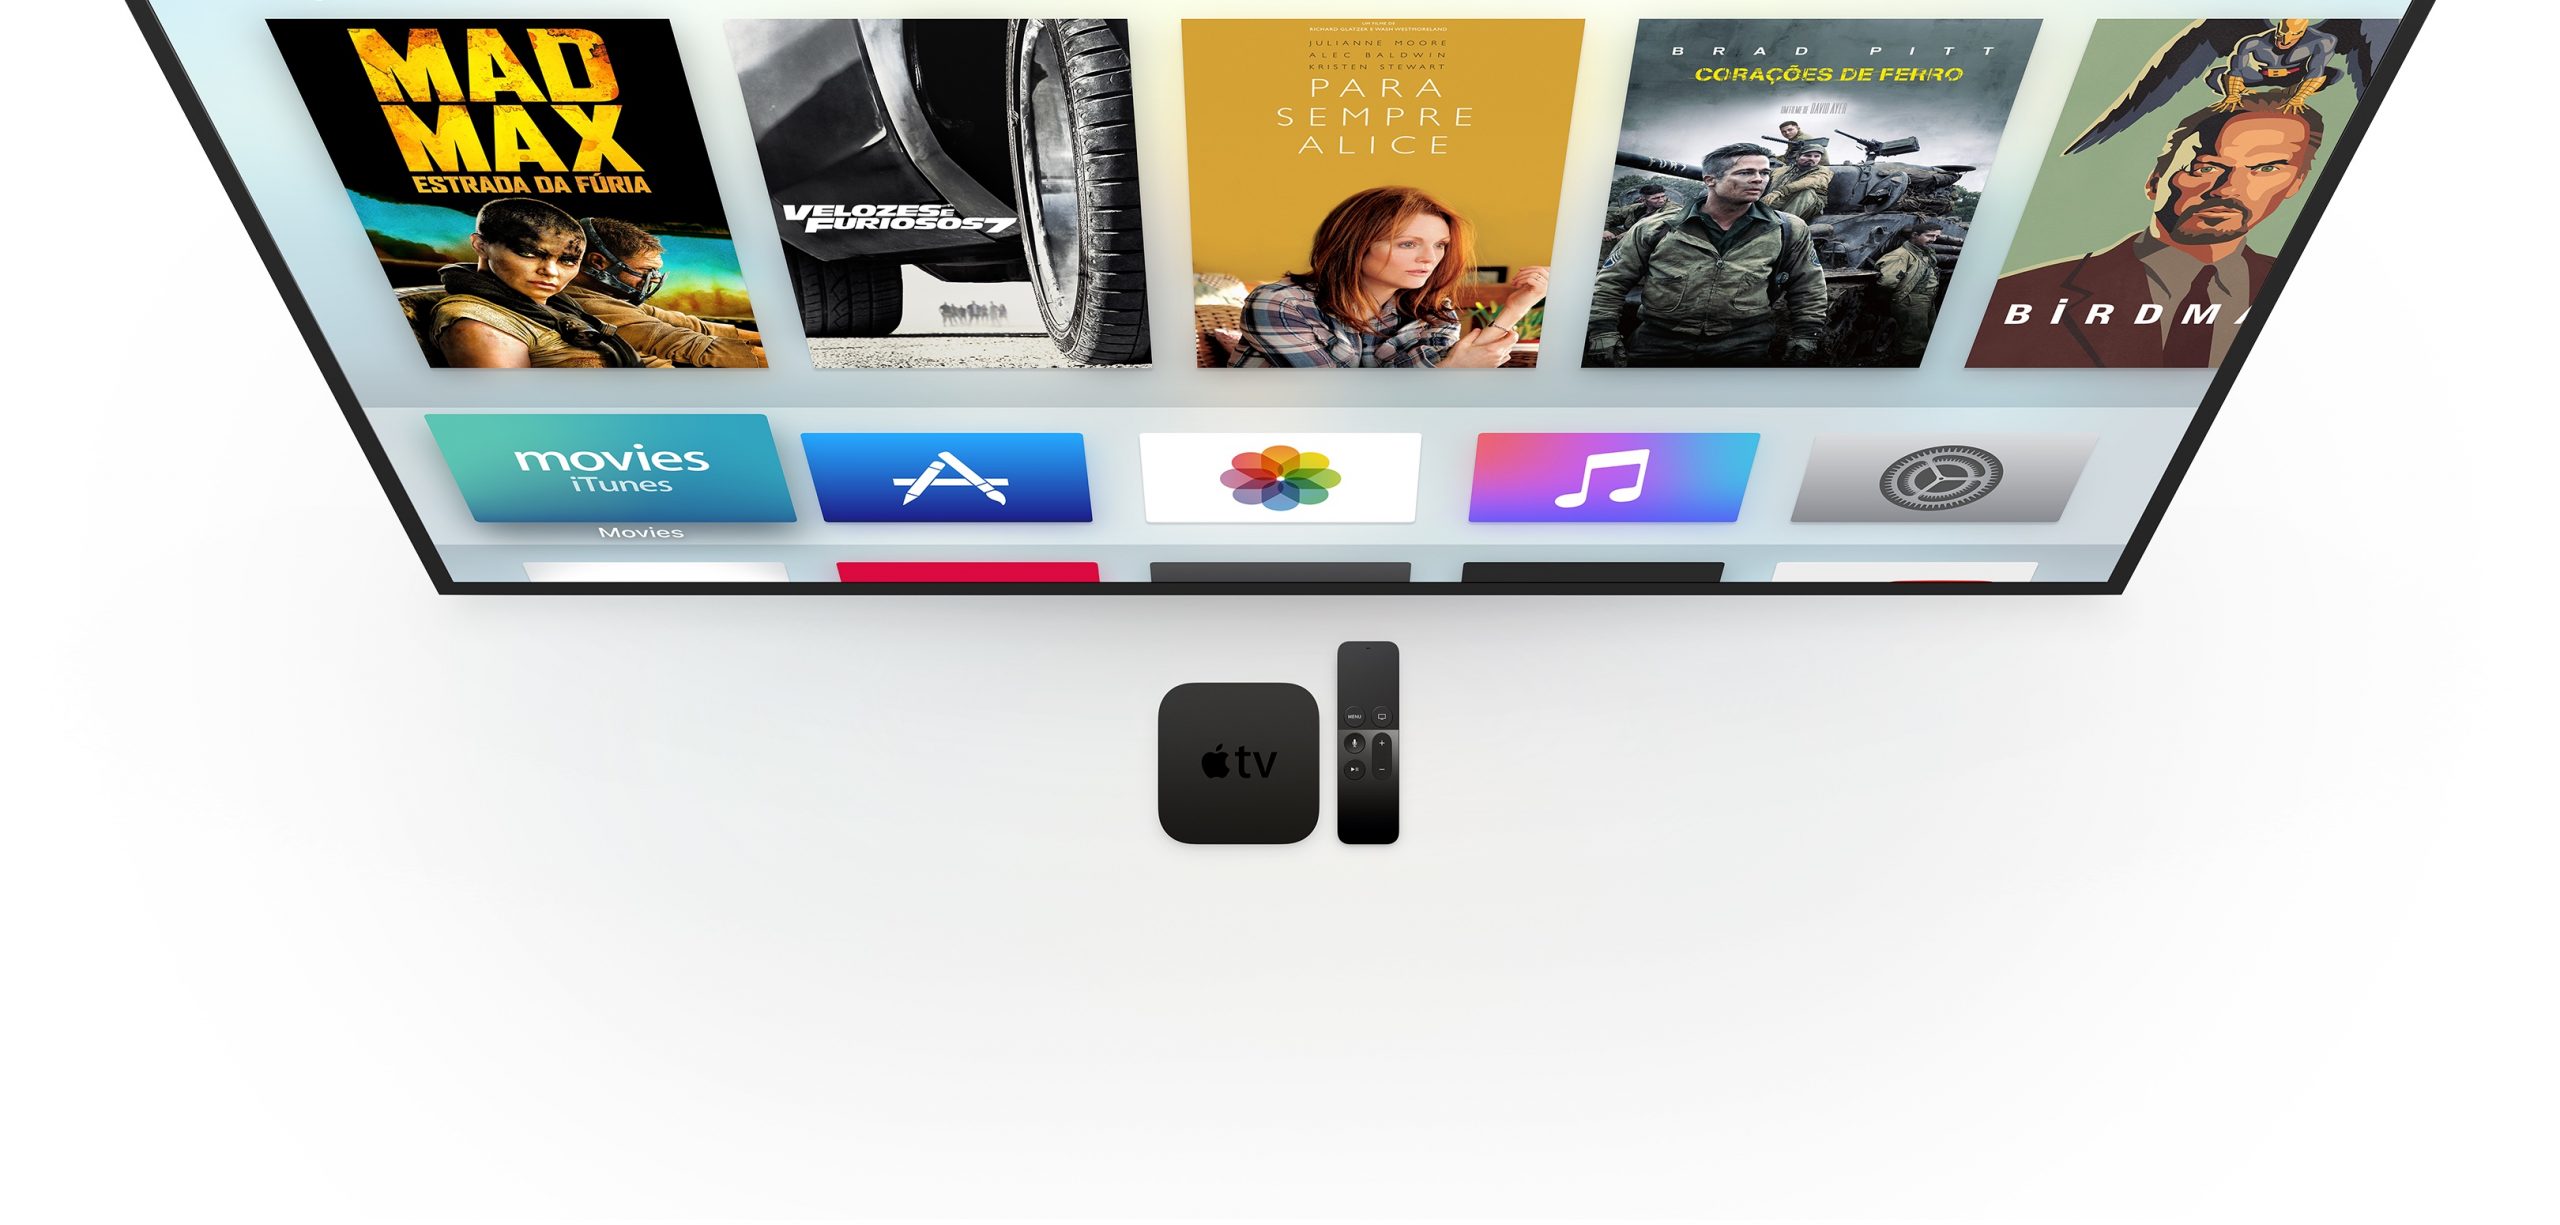 Apple TV: the future of TV yet to come